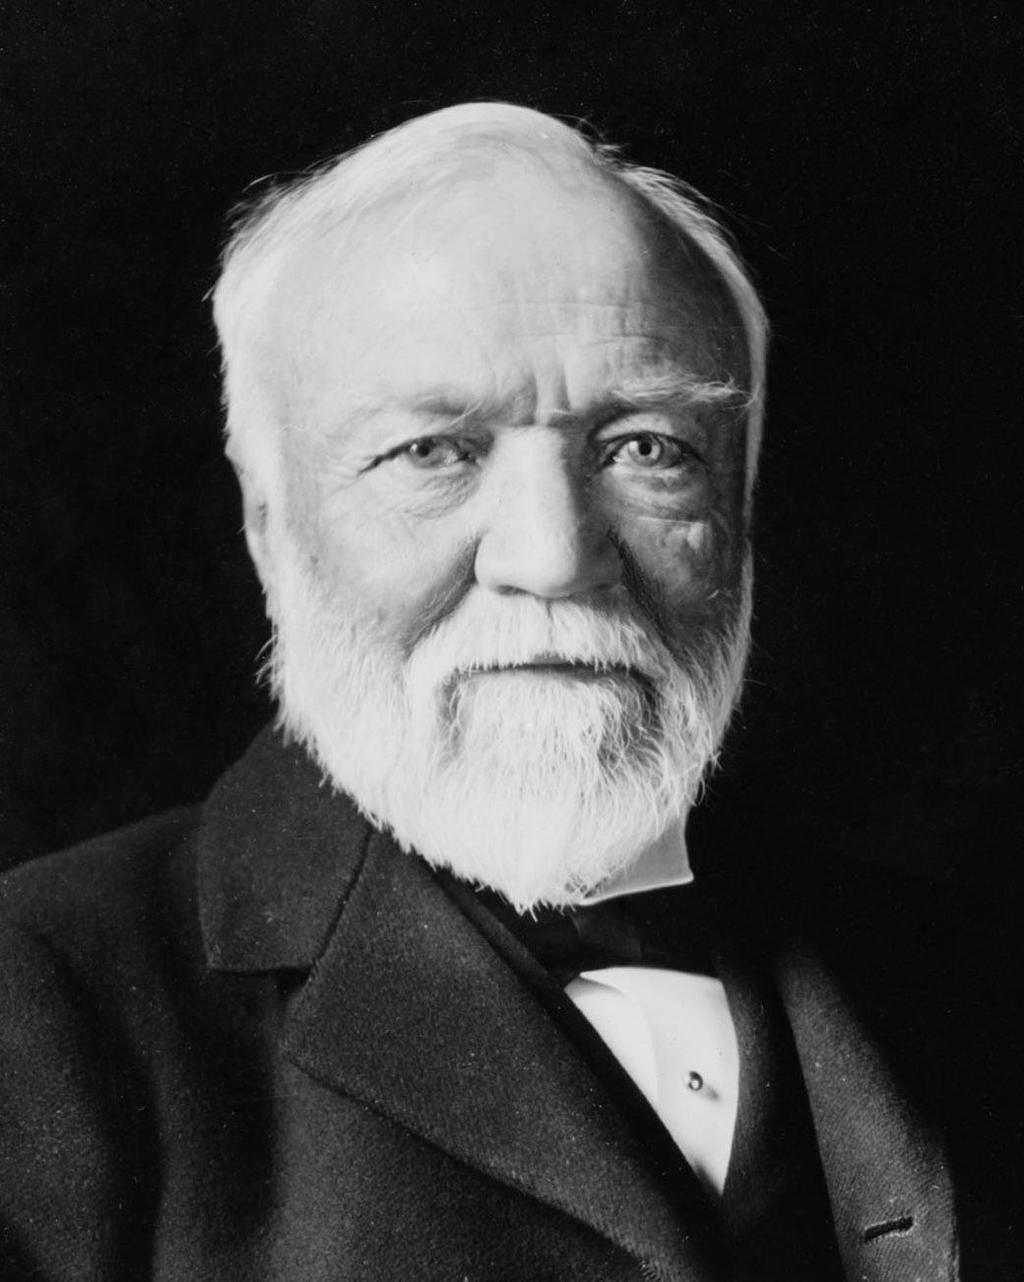 universities Andrew Carnegie (Carnegie Steel) Used vertical integration to buy coal, lime, and iron mines to control steel industry Considered a